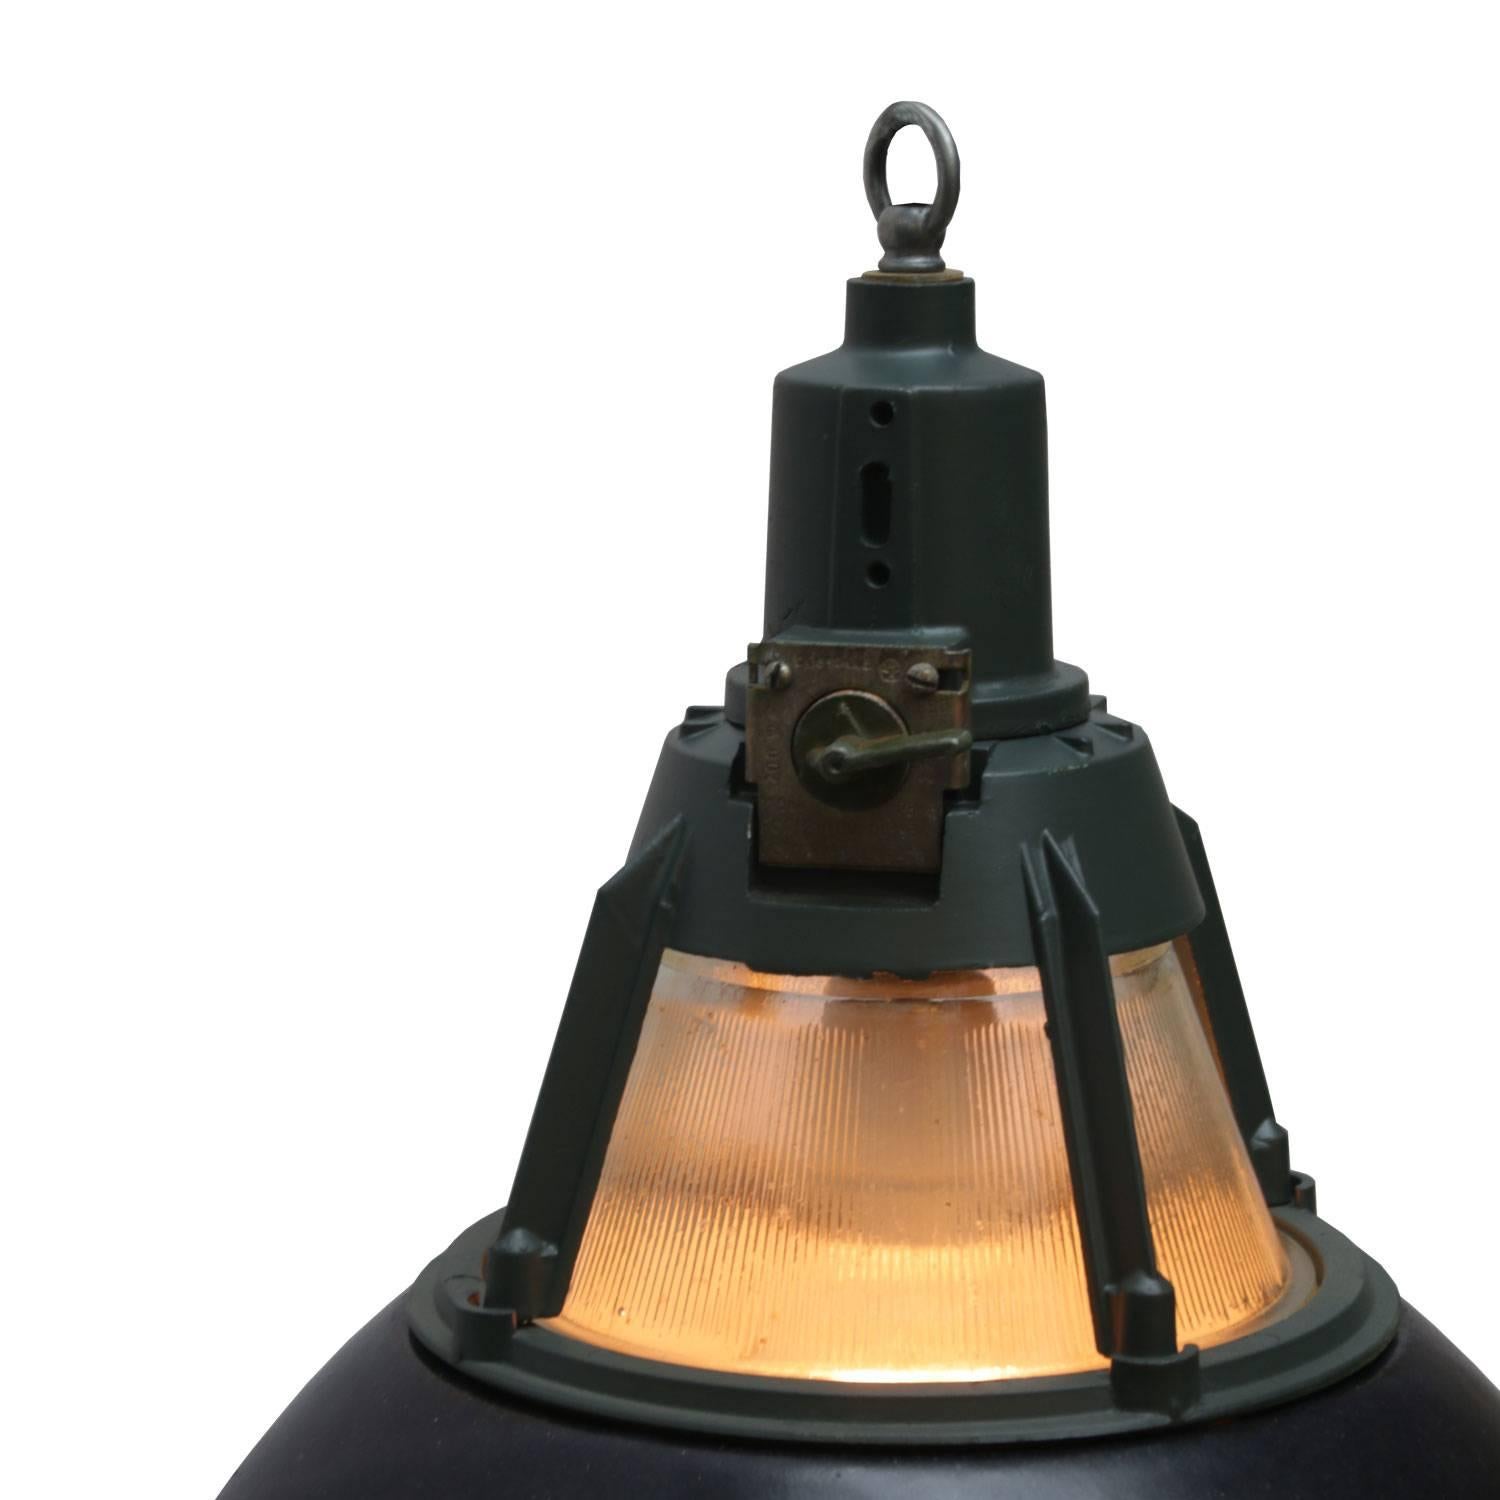 Enamel industrial pendant. Black enamel shade. White inside.
Dark grey / green cast aluminium top.

Weight: 4.0 kg / 8.8 lb

All lamps have been made suitable by international standards for incandescent light bulbs, energy-efficient and LED bulbs.